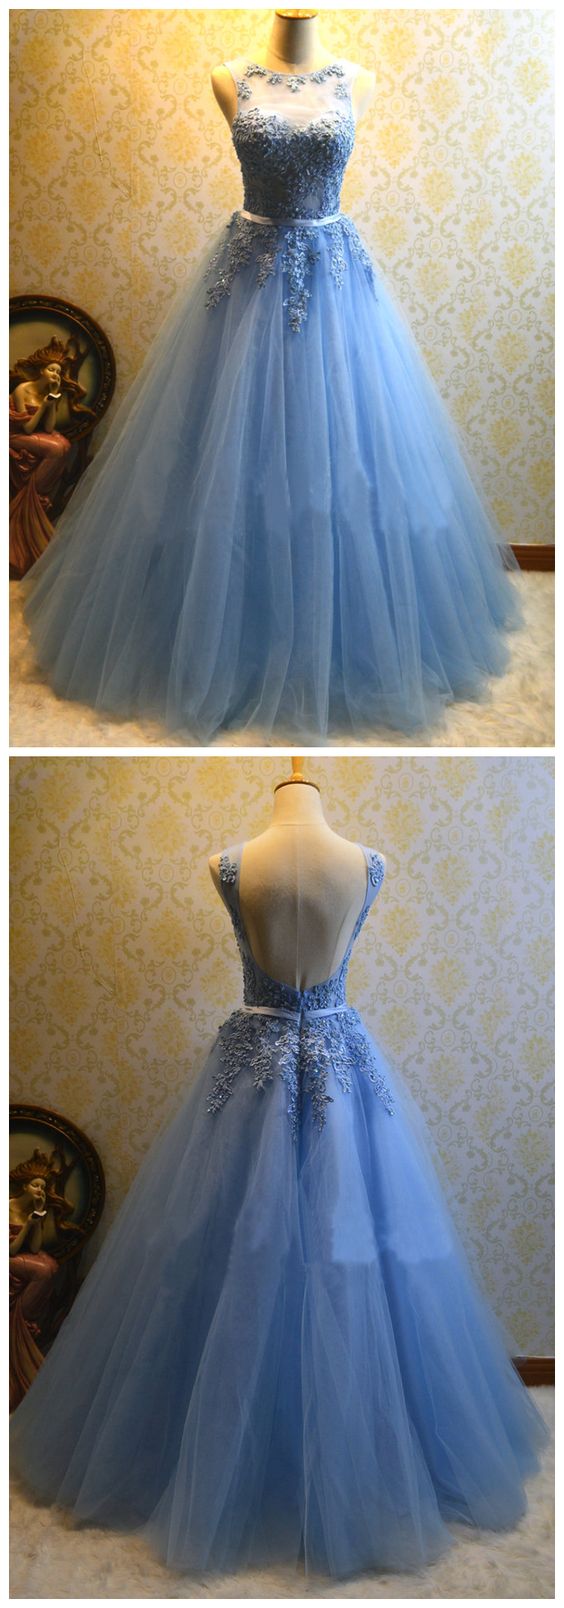 Ball Gown Blue Prom Dress,Tulle Appliques Prom Dresses,Long Quinceanera Dresses   cg16021